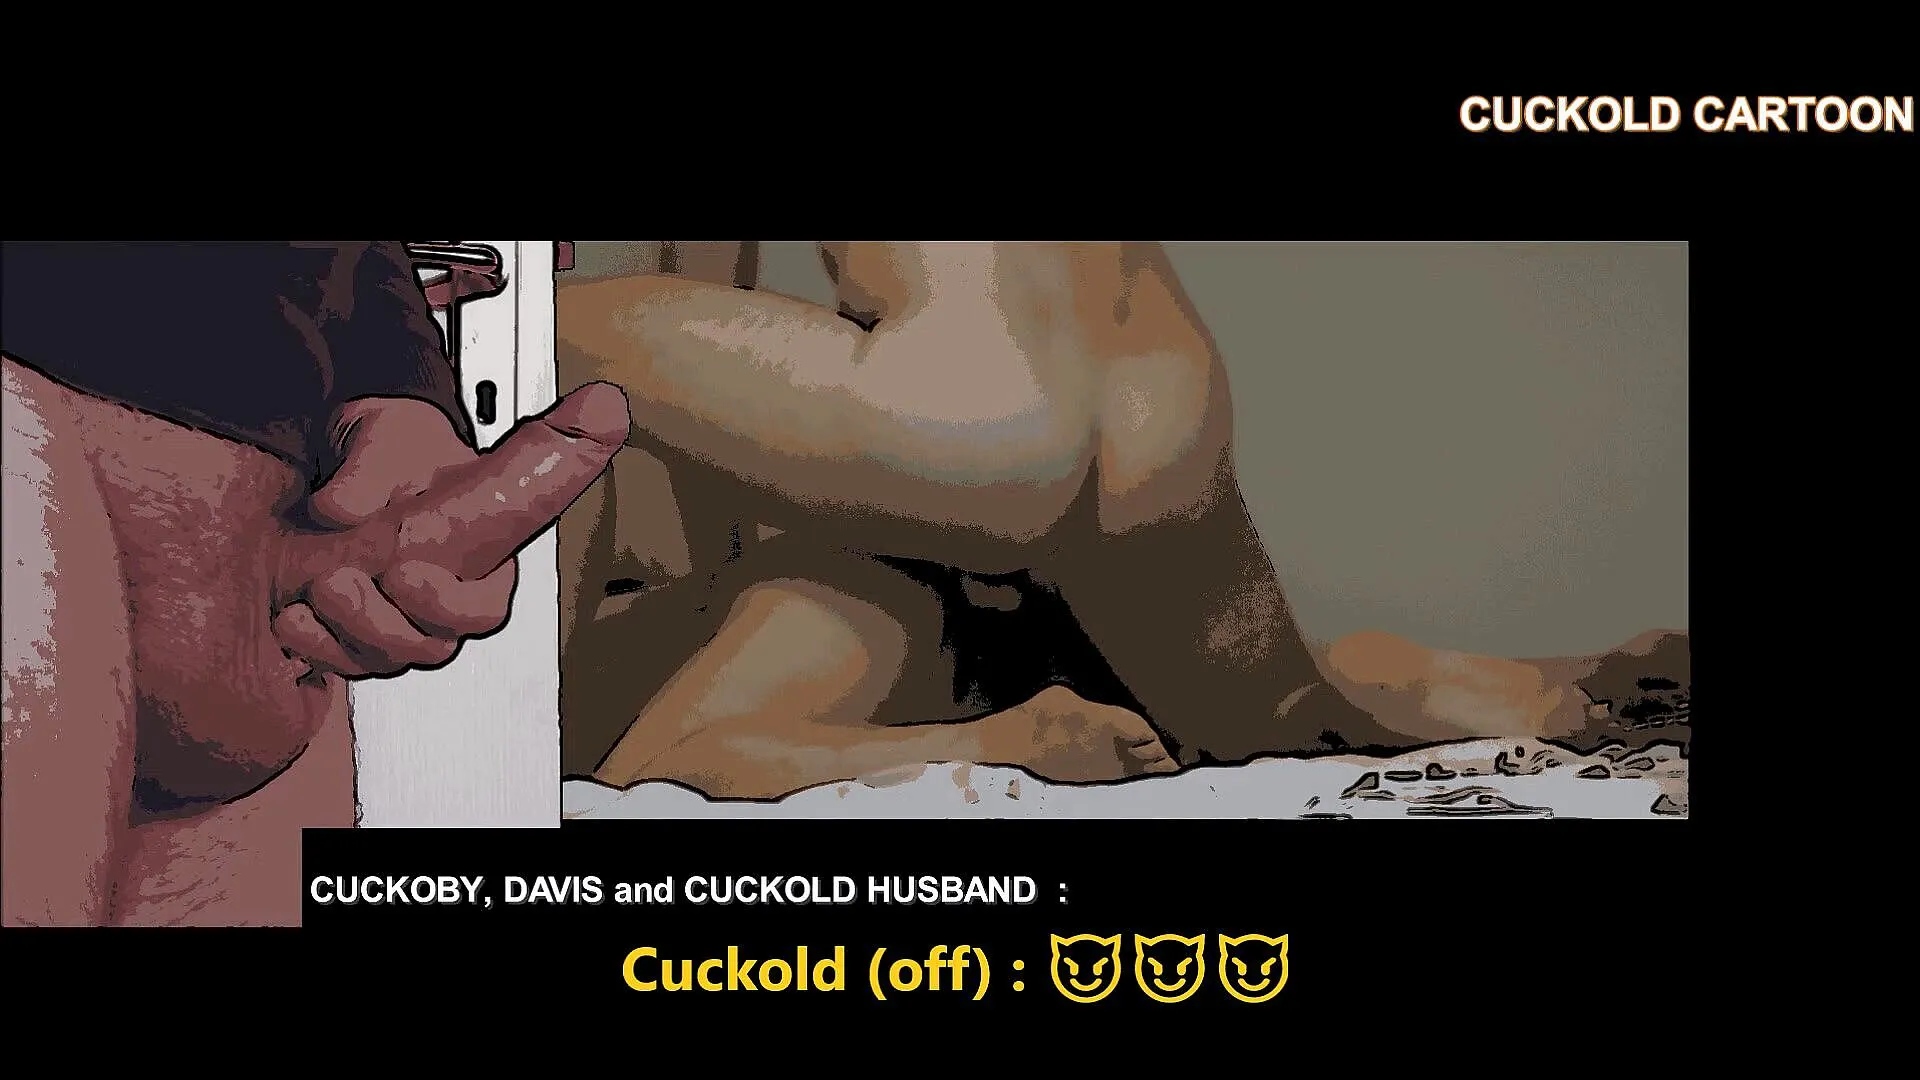 Cuckold cartoon : Anal in front of husband by Cuckoby | Faphouse